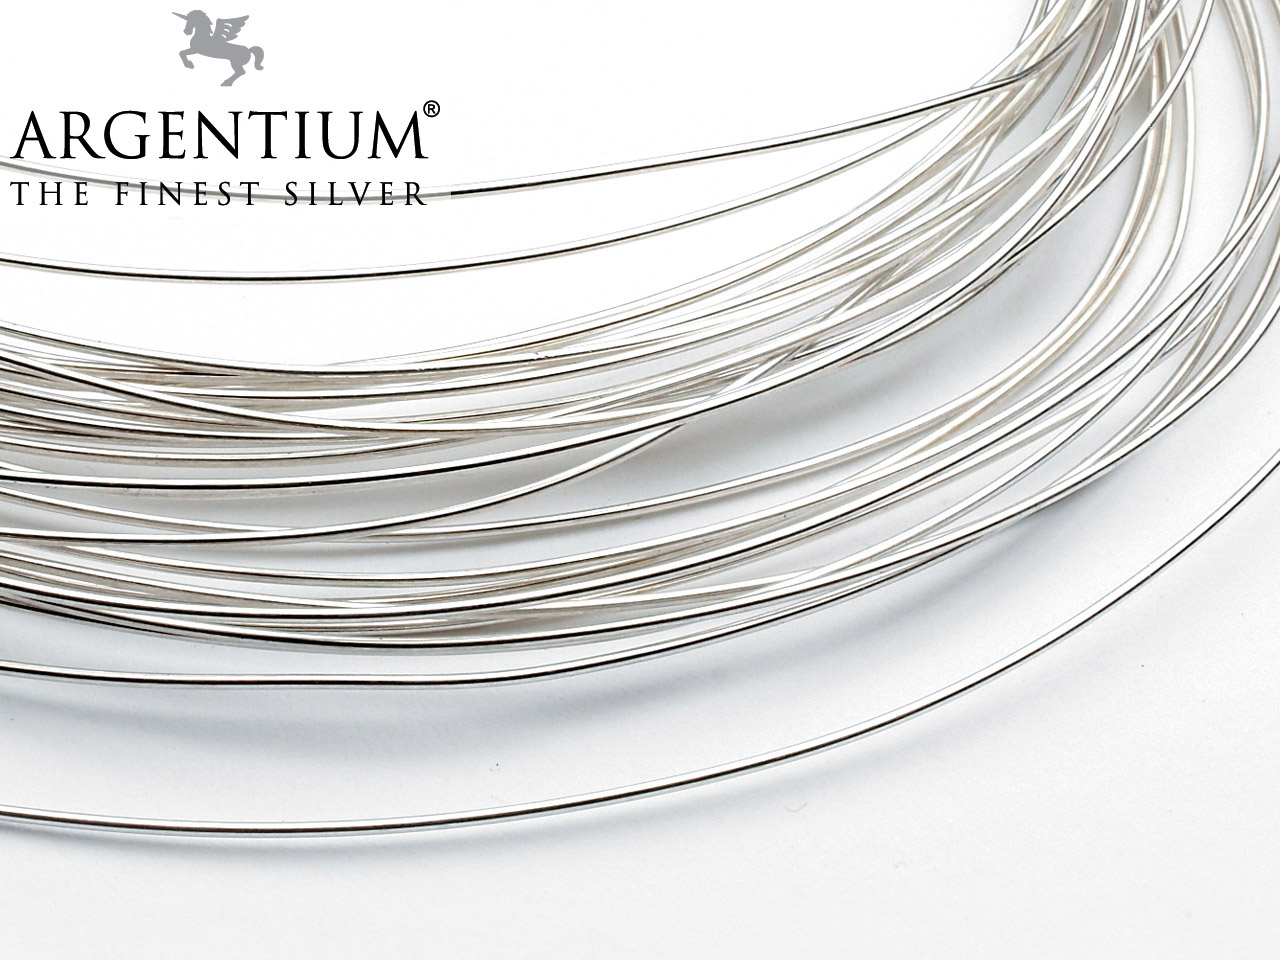 Is your Argentium Silver supplied annealed?